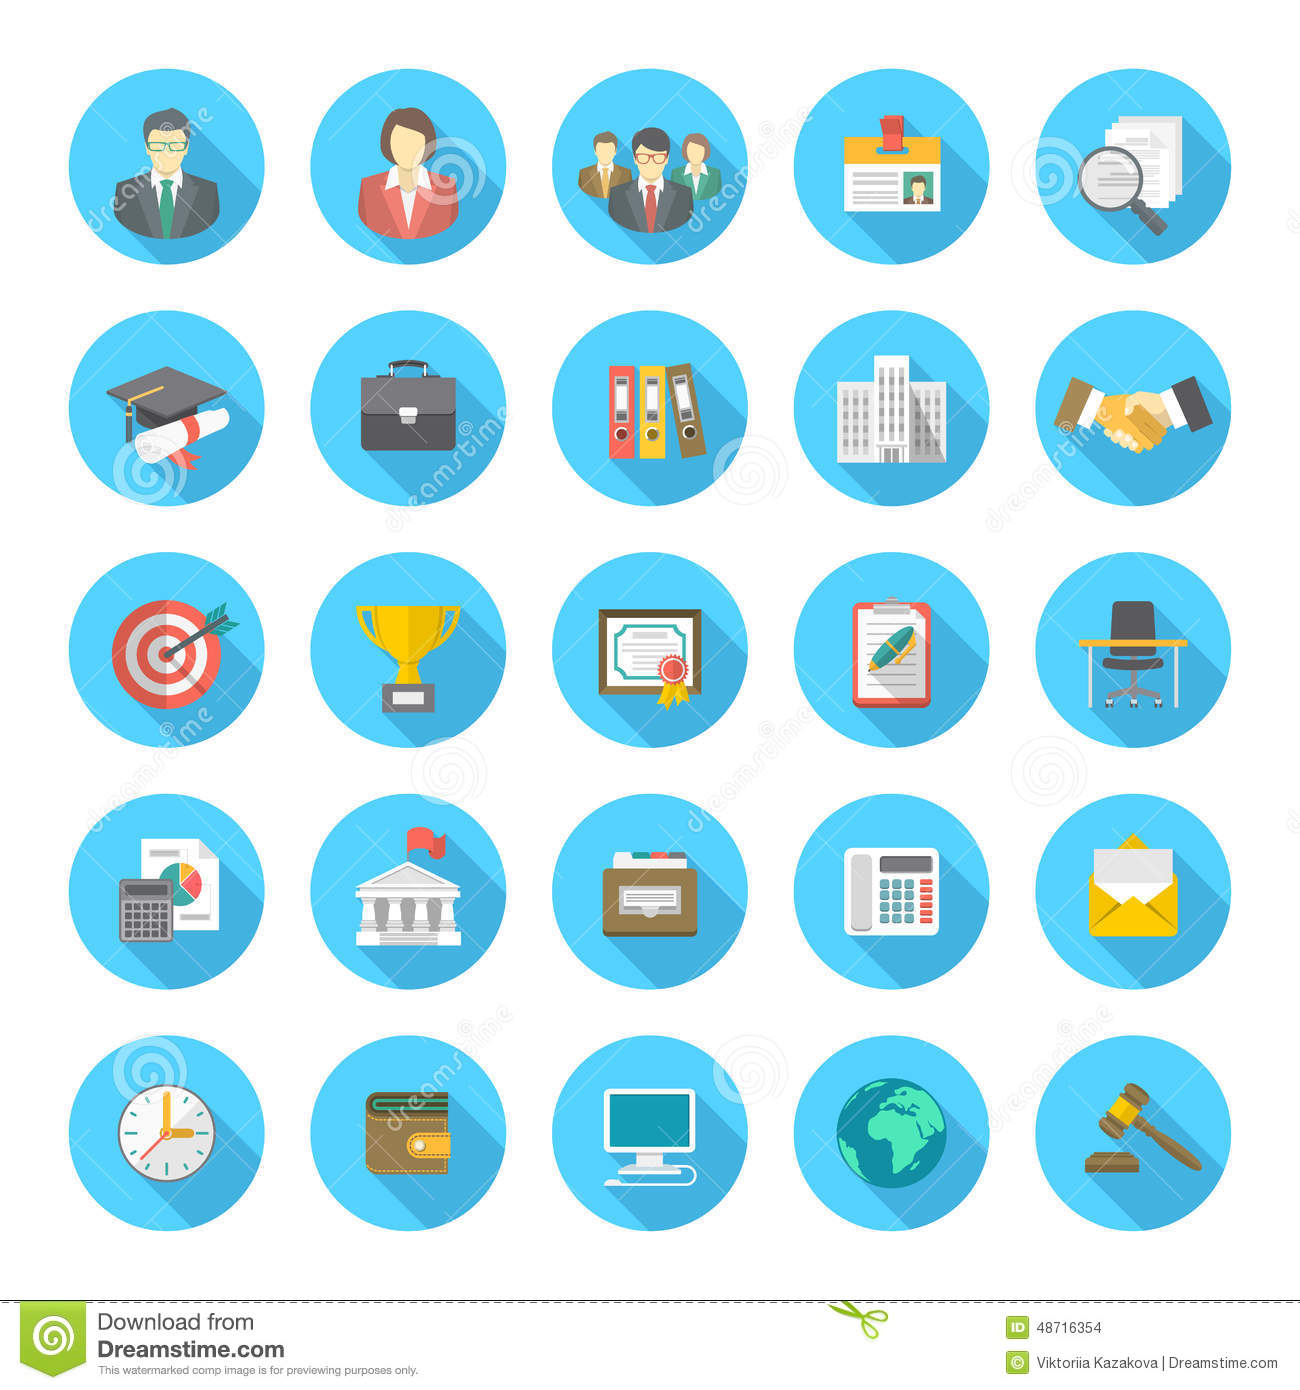 Round Flat Icons Vector